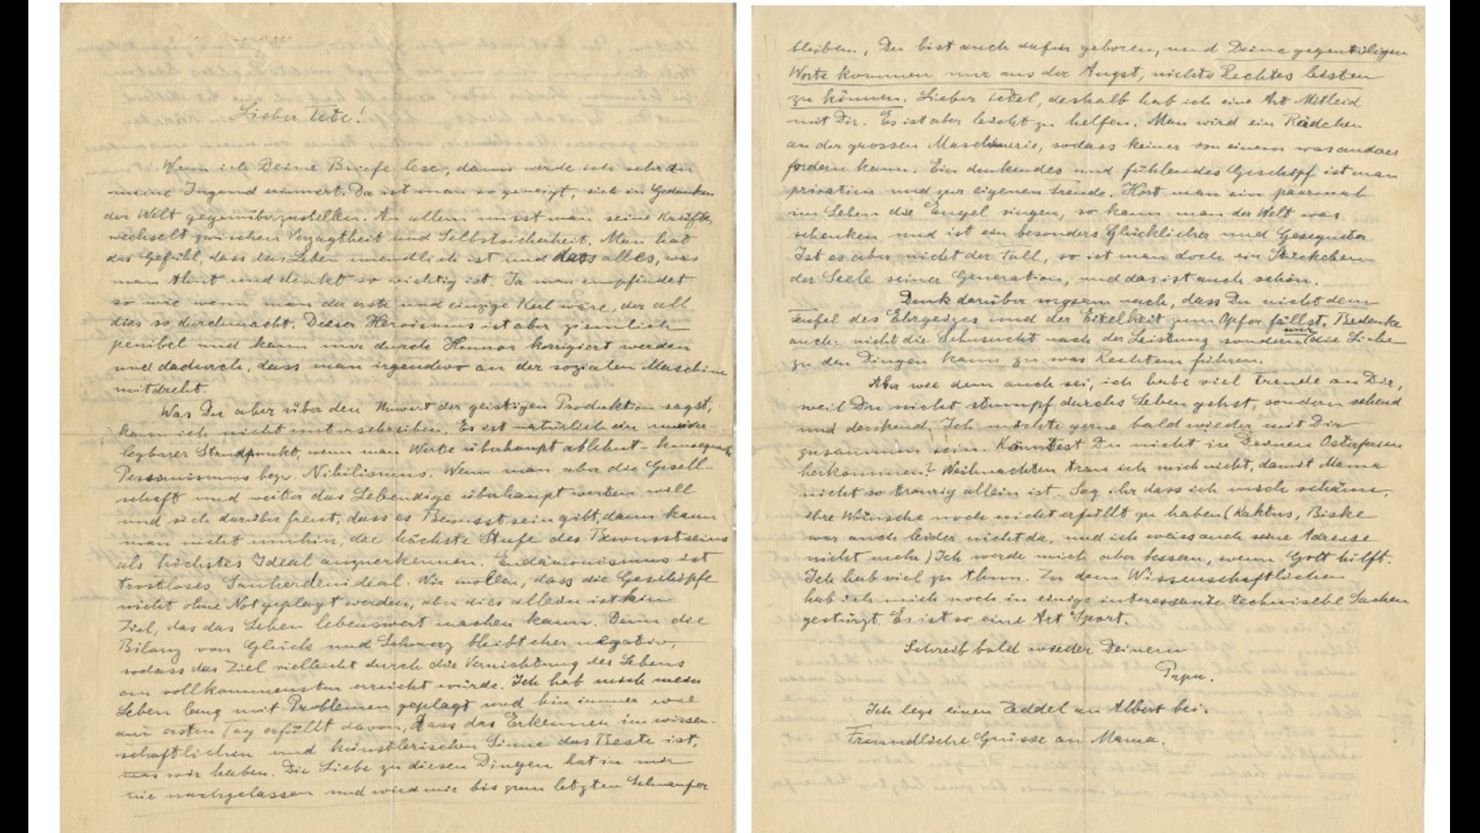 In a letter to his son Eduard -- one of 27 that was up for auction last week -- Albert Einstein wrote about youth. "When you're young, you tend to mentally oppose the world," he wrote. "You measure your strength on everything and go back and forth the between hesitation and confidence."